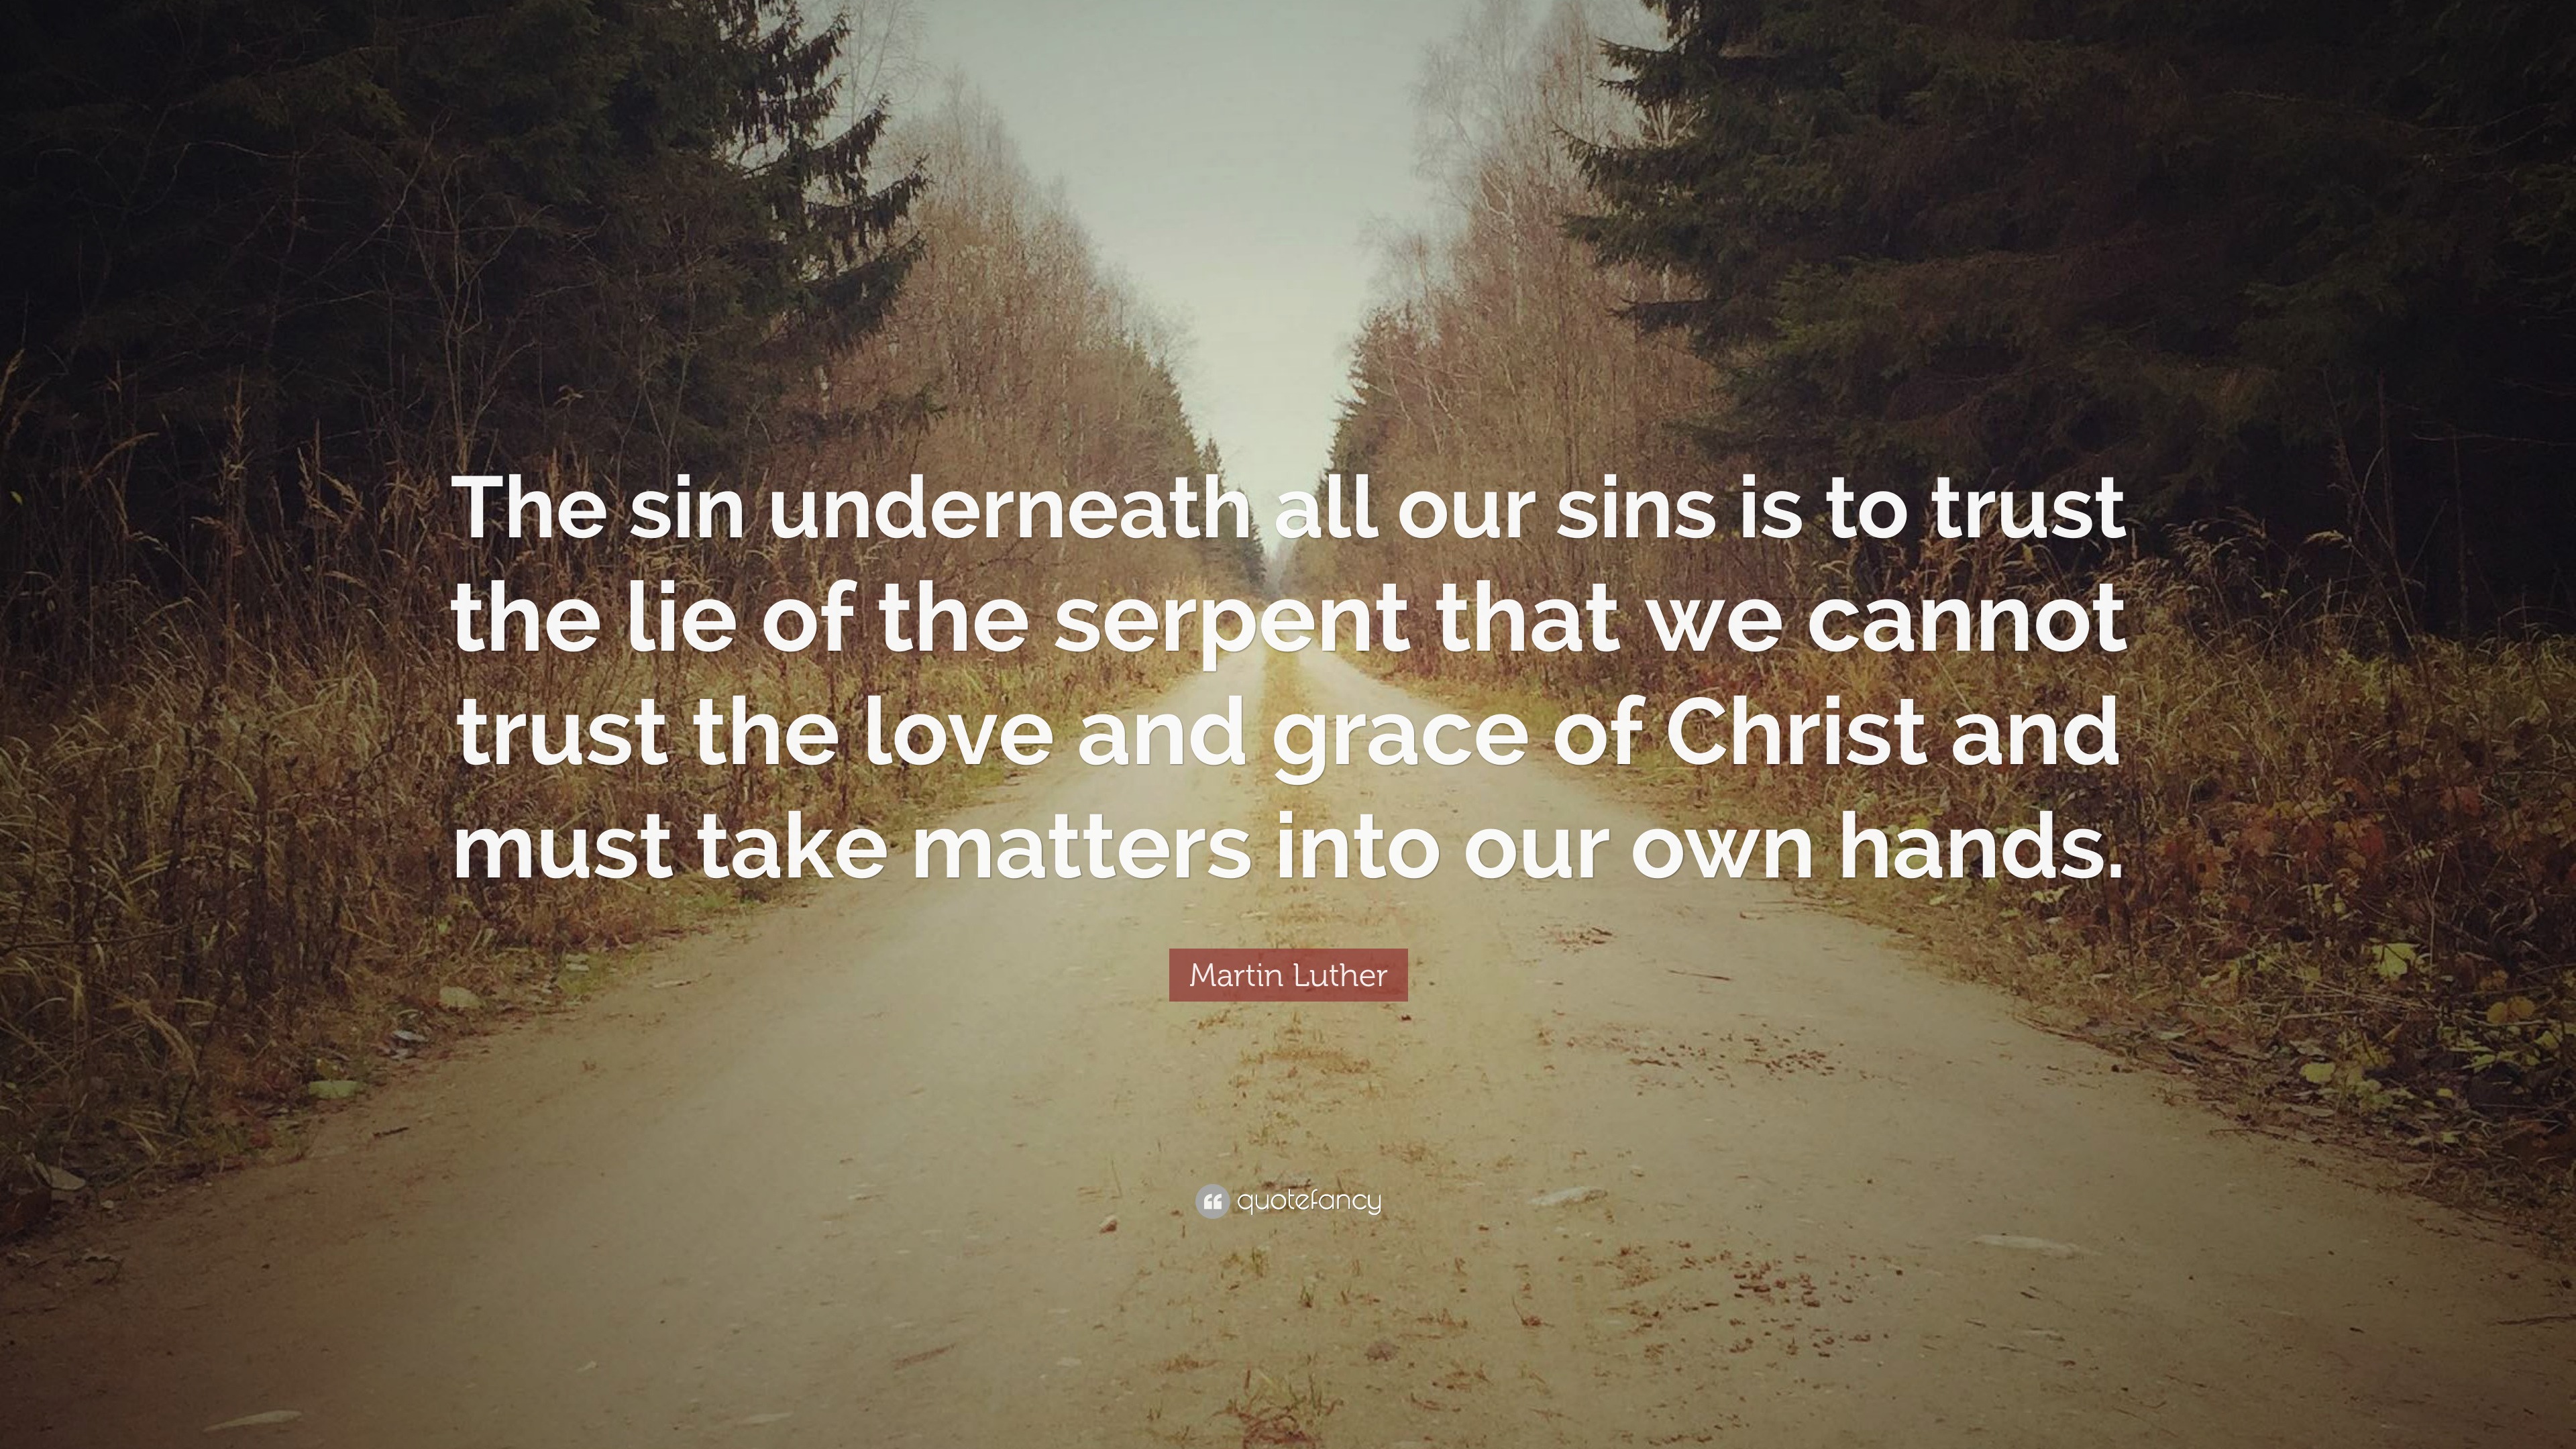 Martin Luther Quote: "The sin underneath all our sins is ...